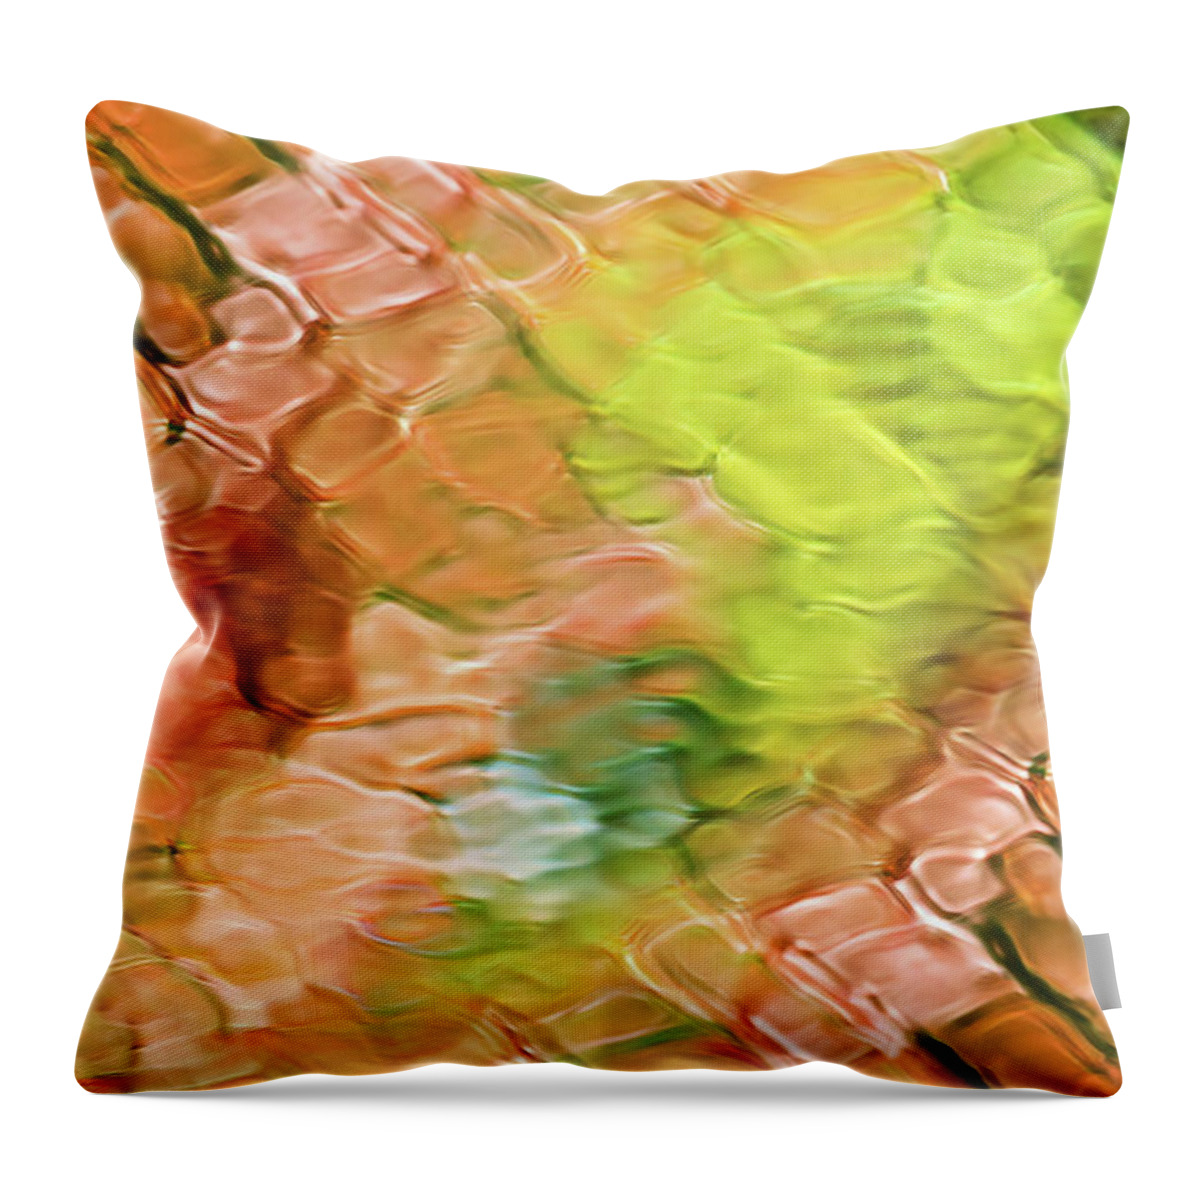 Water Throw Pillow featuring the photograph Coral Coast Water Abstract by Christina Rollo